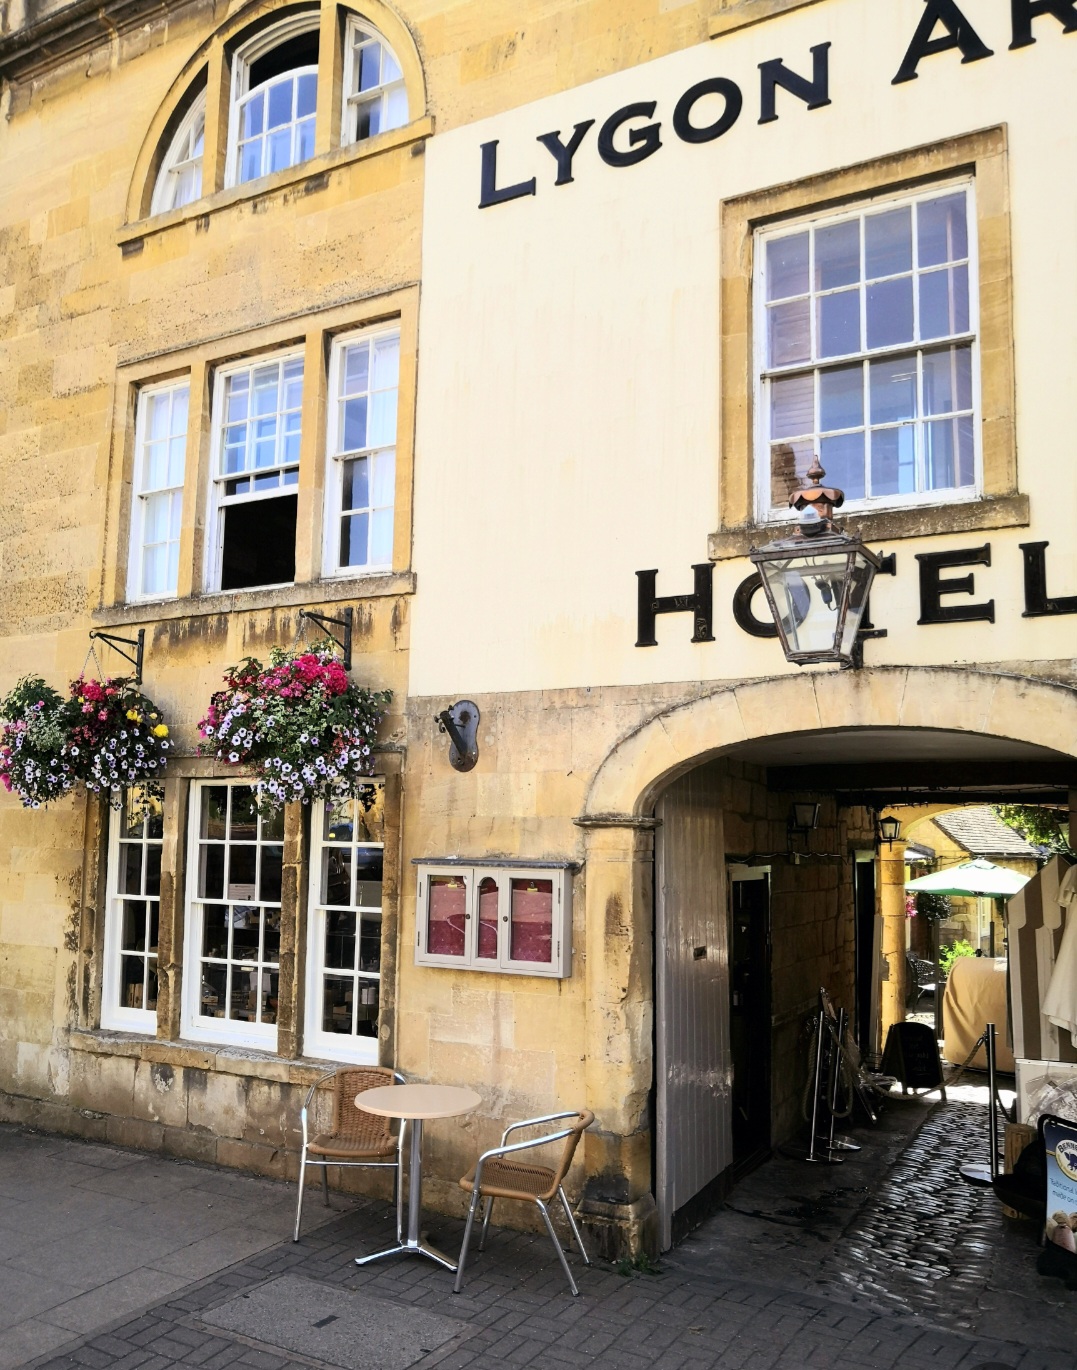 One of the Best Pubs in Chipping Campden, the Lygon Arms Hotel